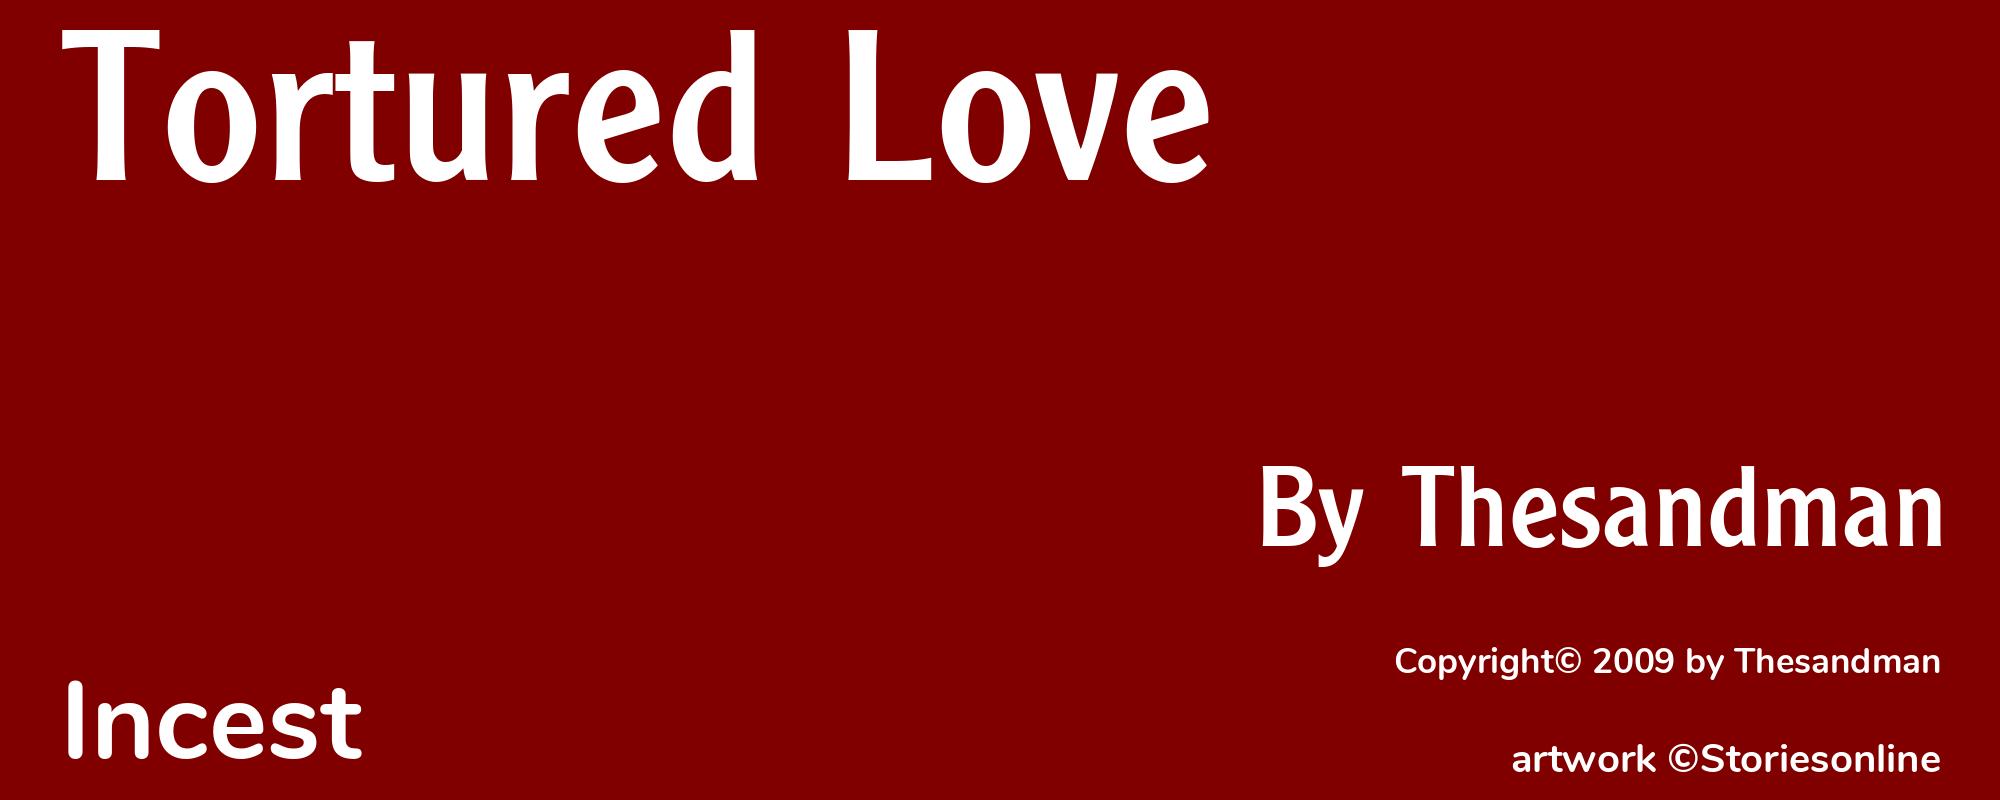 Tortured Love - Cover